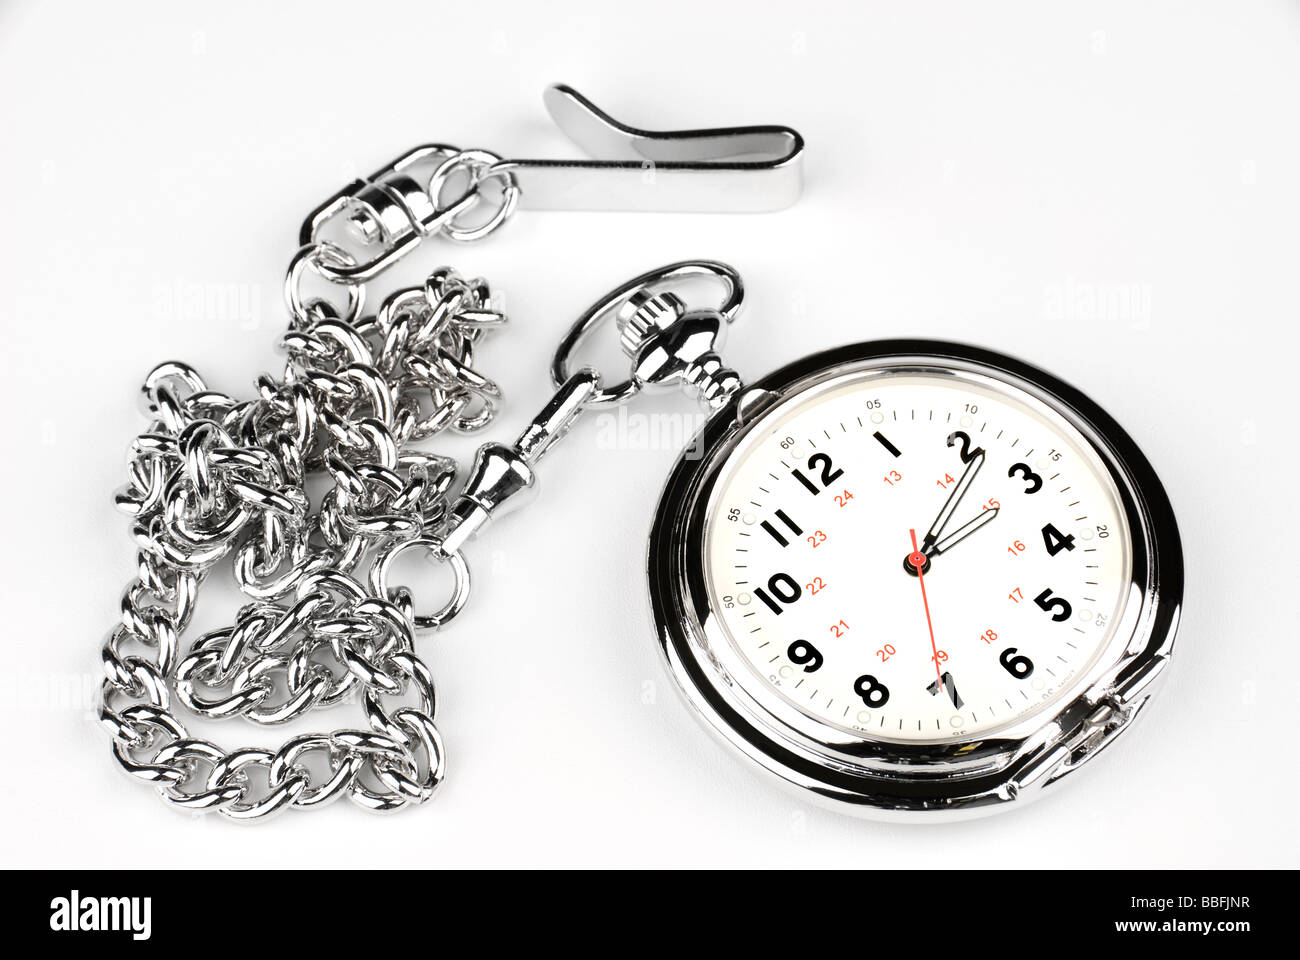 A silver chrome pocket watch on a white background Stock Photo